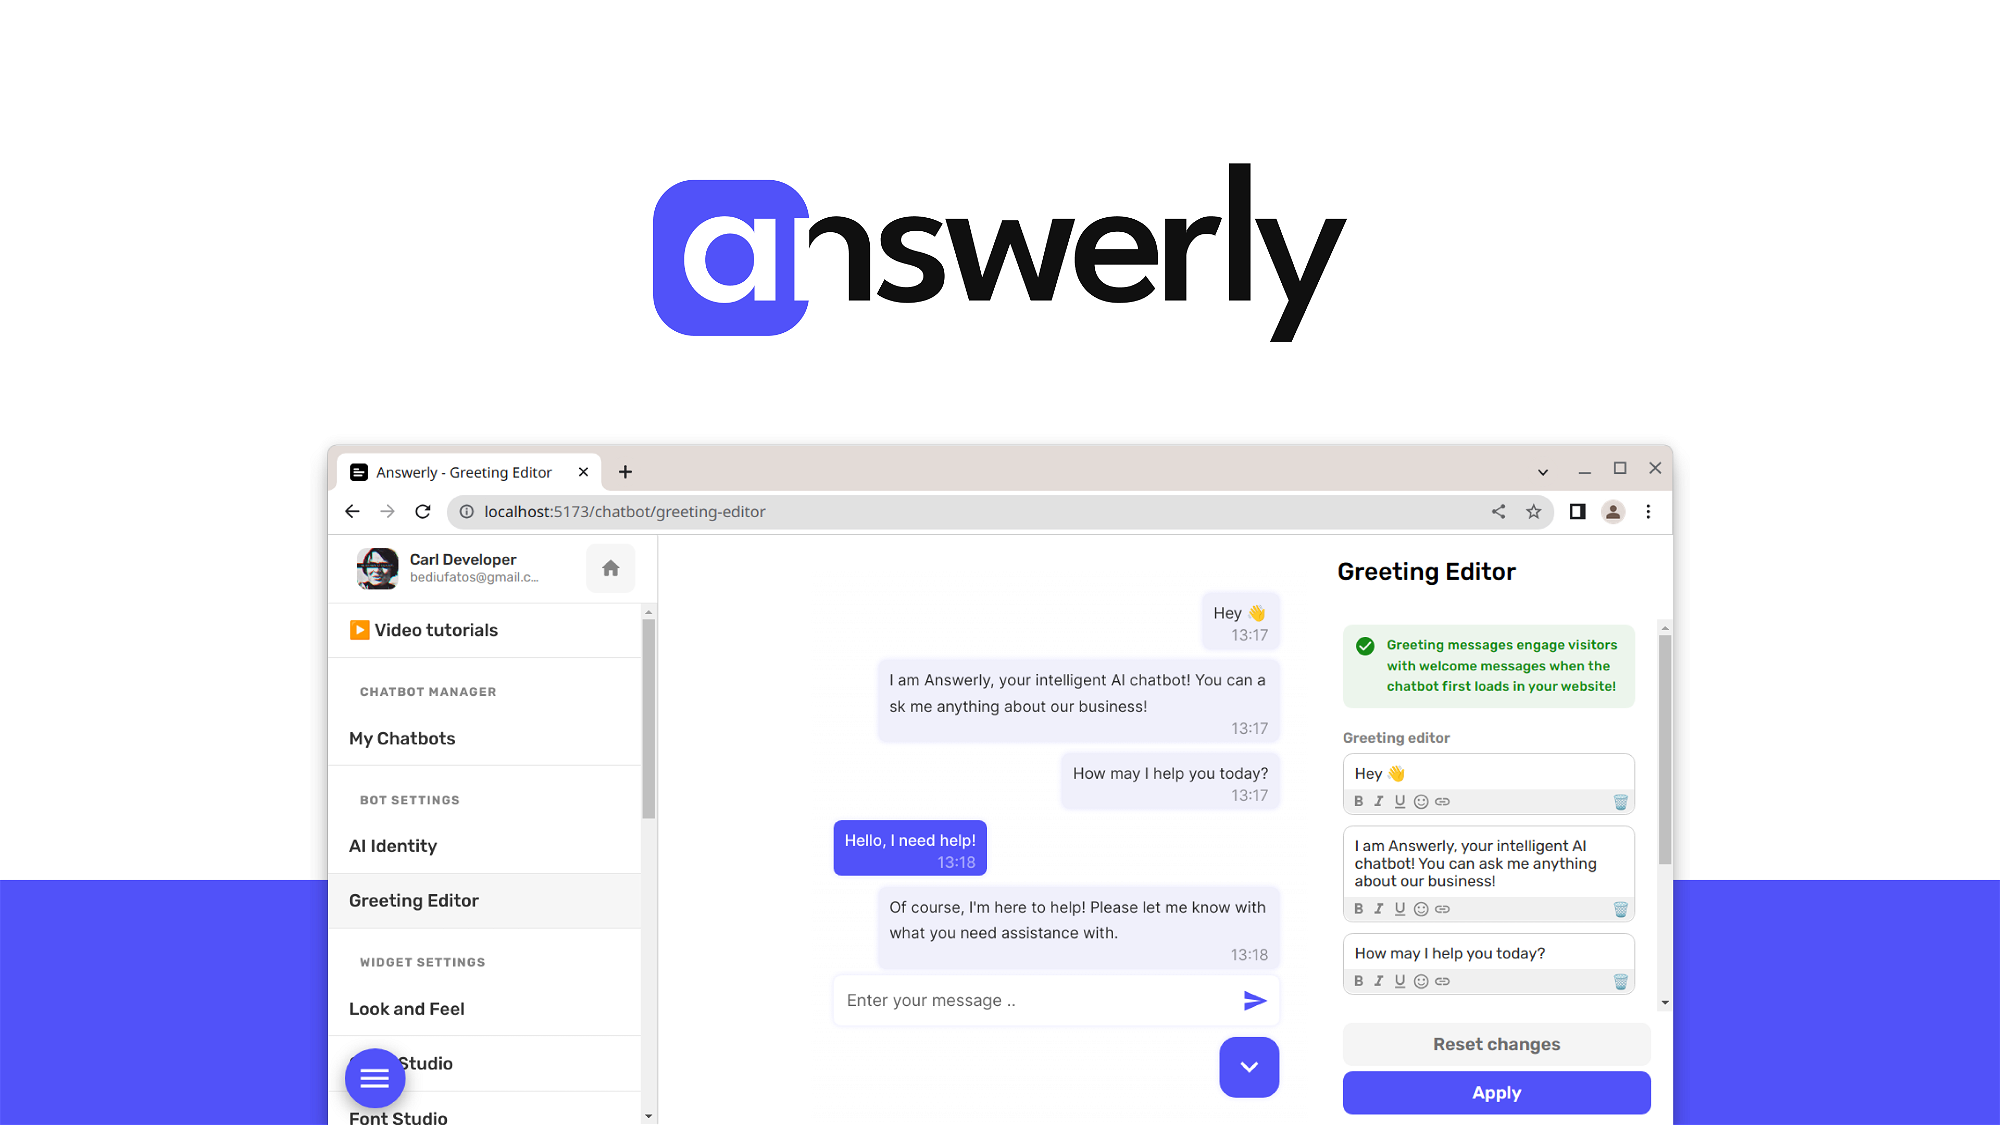 Answerly – LIFETIME Deals by appsumo